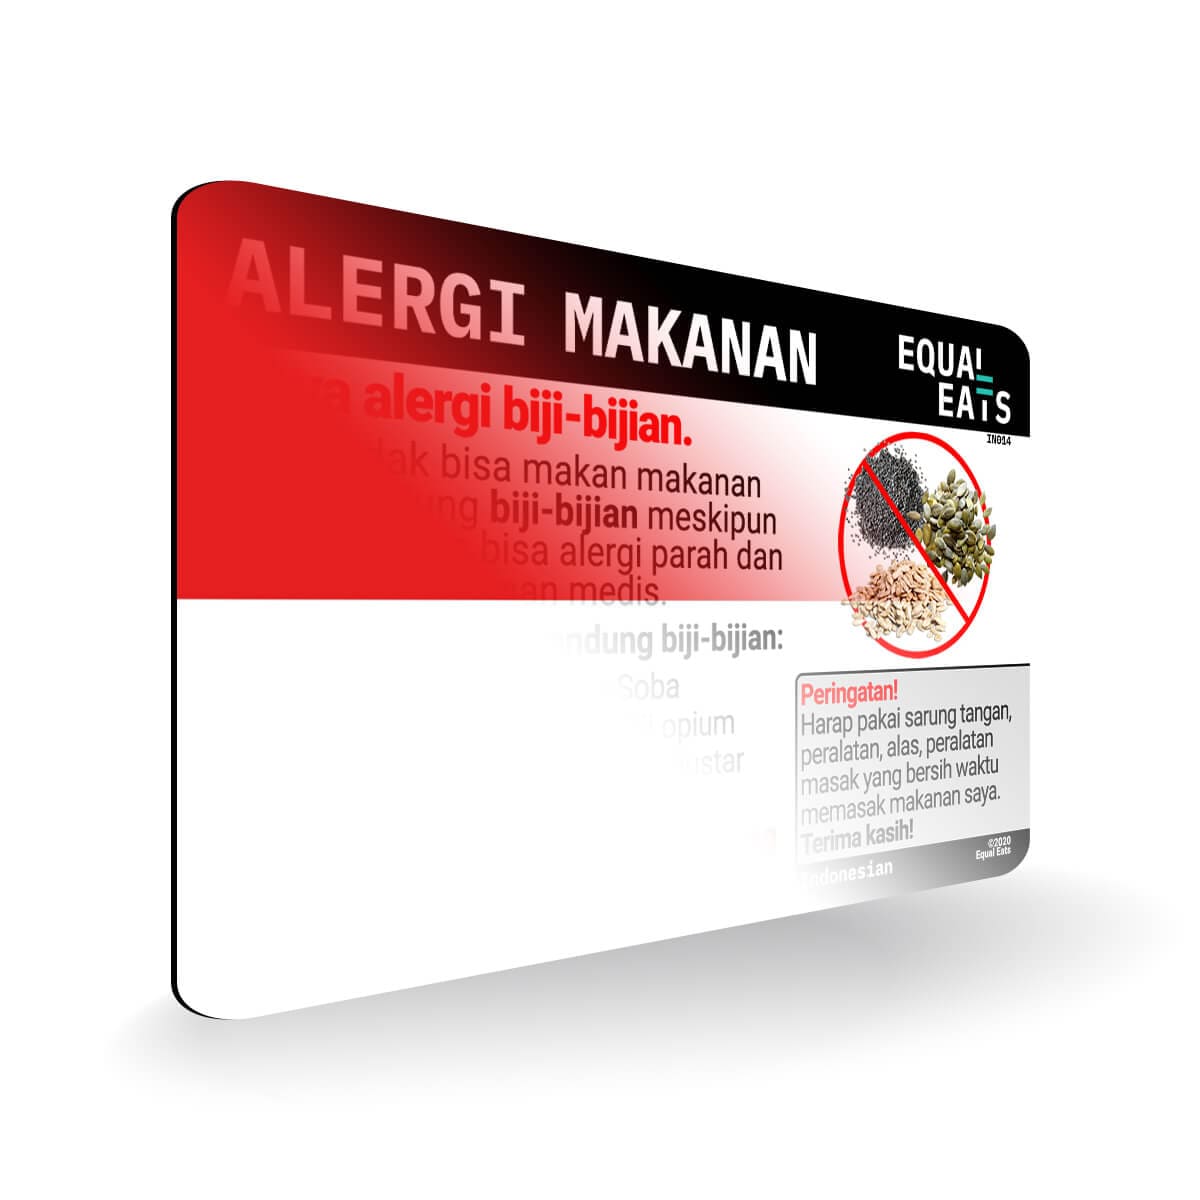 Seed Allergy in Indonesian. Seed Allergy Card for Indonesia